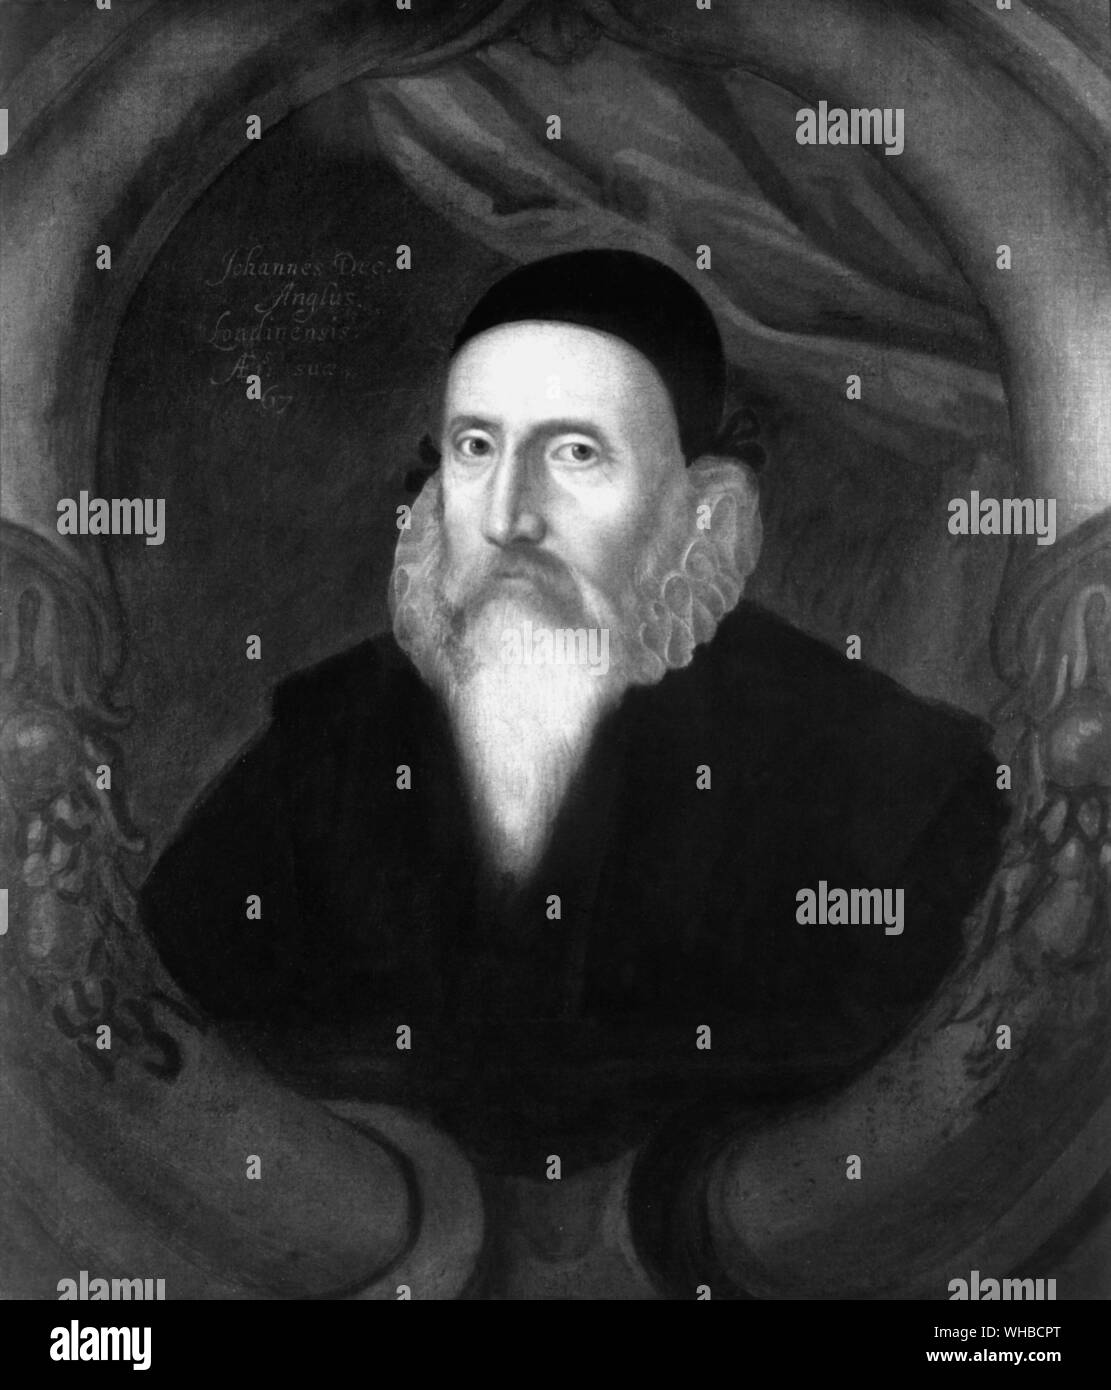 John Dee - astrologer , aged 67 friend and consultant to Queen Elizabeth . William Shakespeare may have modelled the character of Prospero in The Tempest on him . 1594 Stock Photo